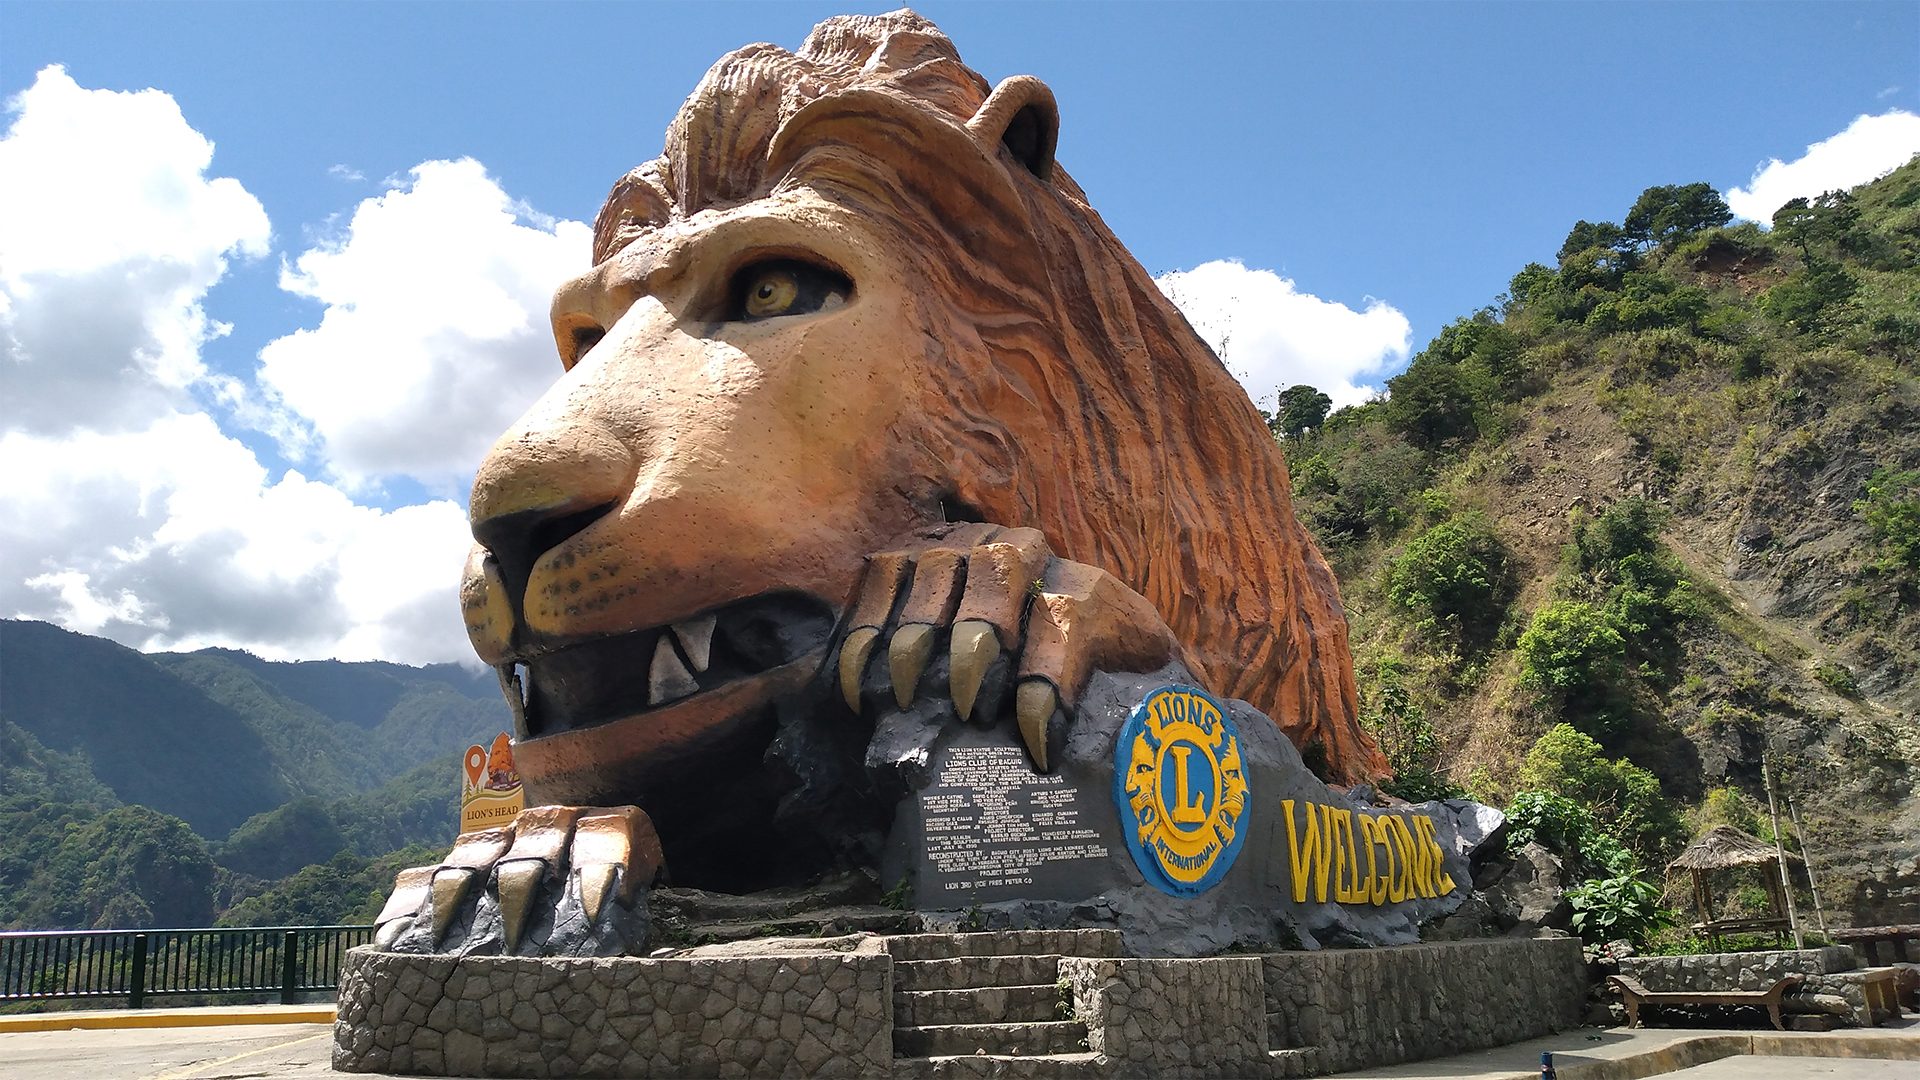 Ifugao sculptor’s daughter wants father credited for Lion’s Head